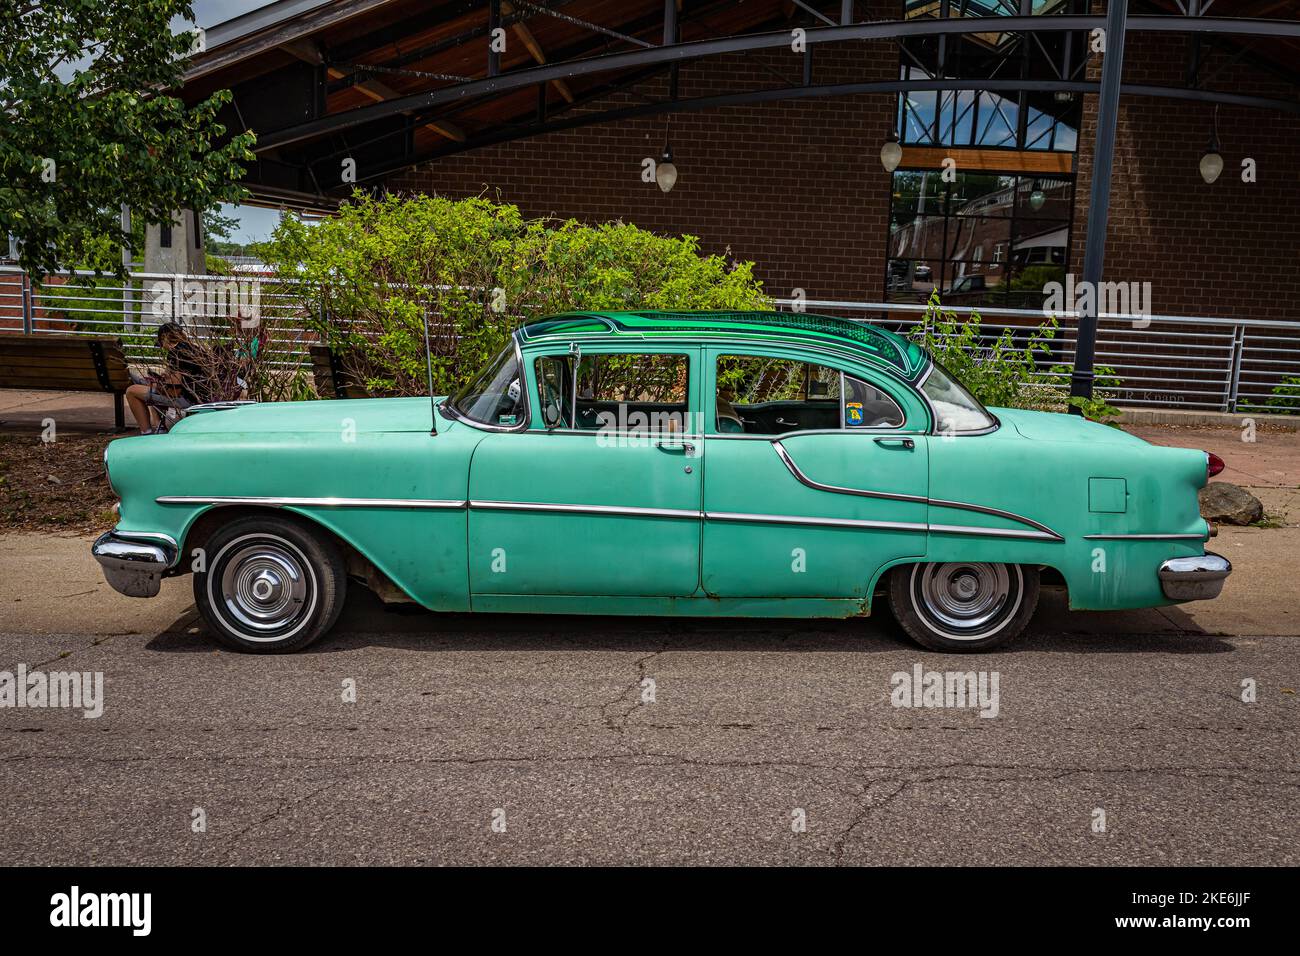 Des Moines, IA - July 02, 2022: High perspective side view of a 1955 Oldsmobile 88 4 Door Sedan at a local car show. Stock Photo